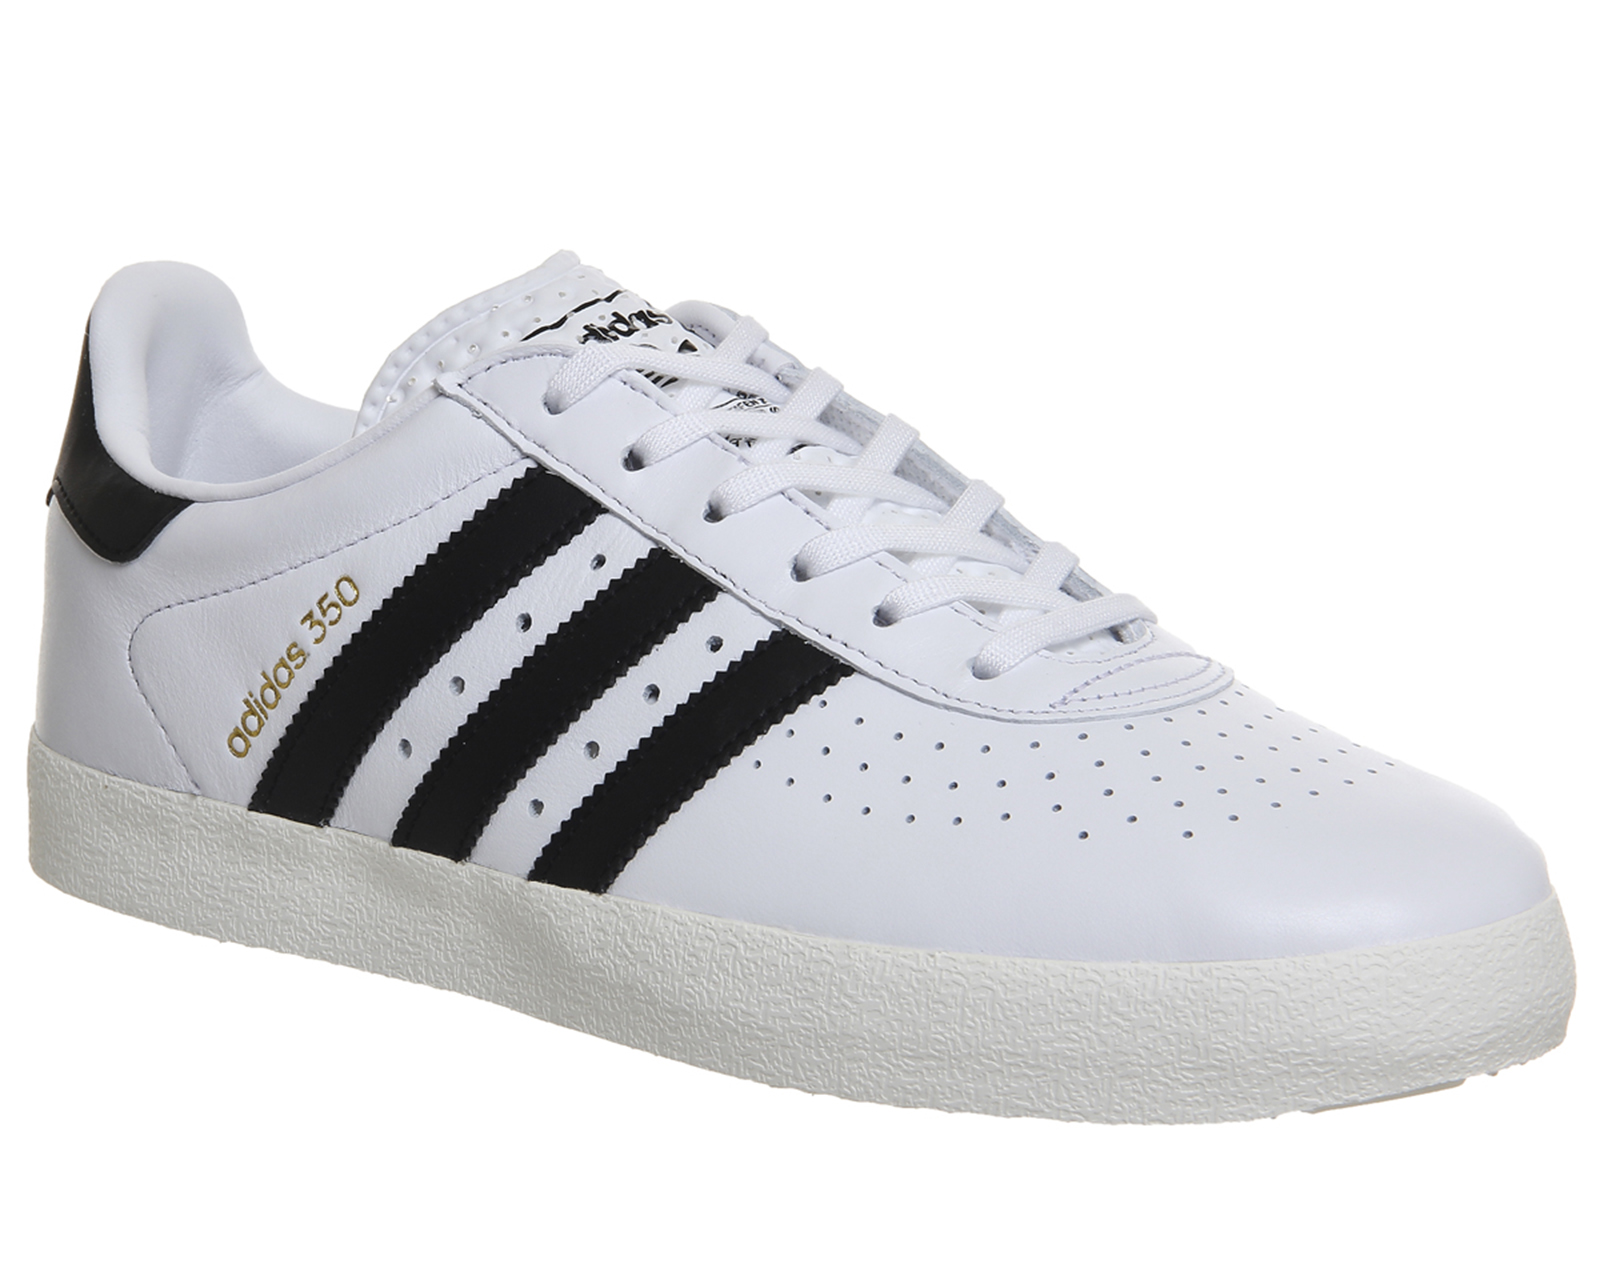 mens adidas 350 trainers